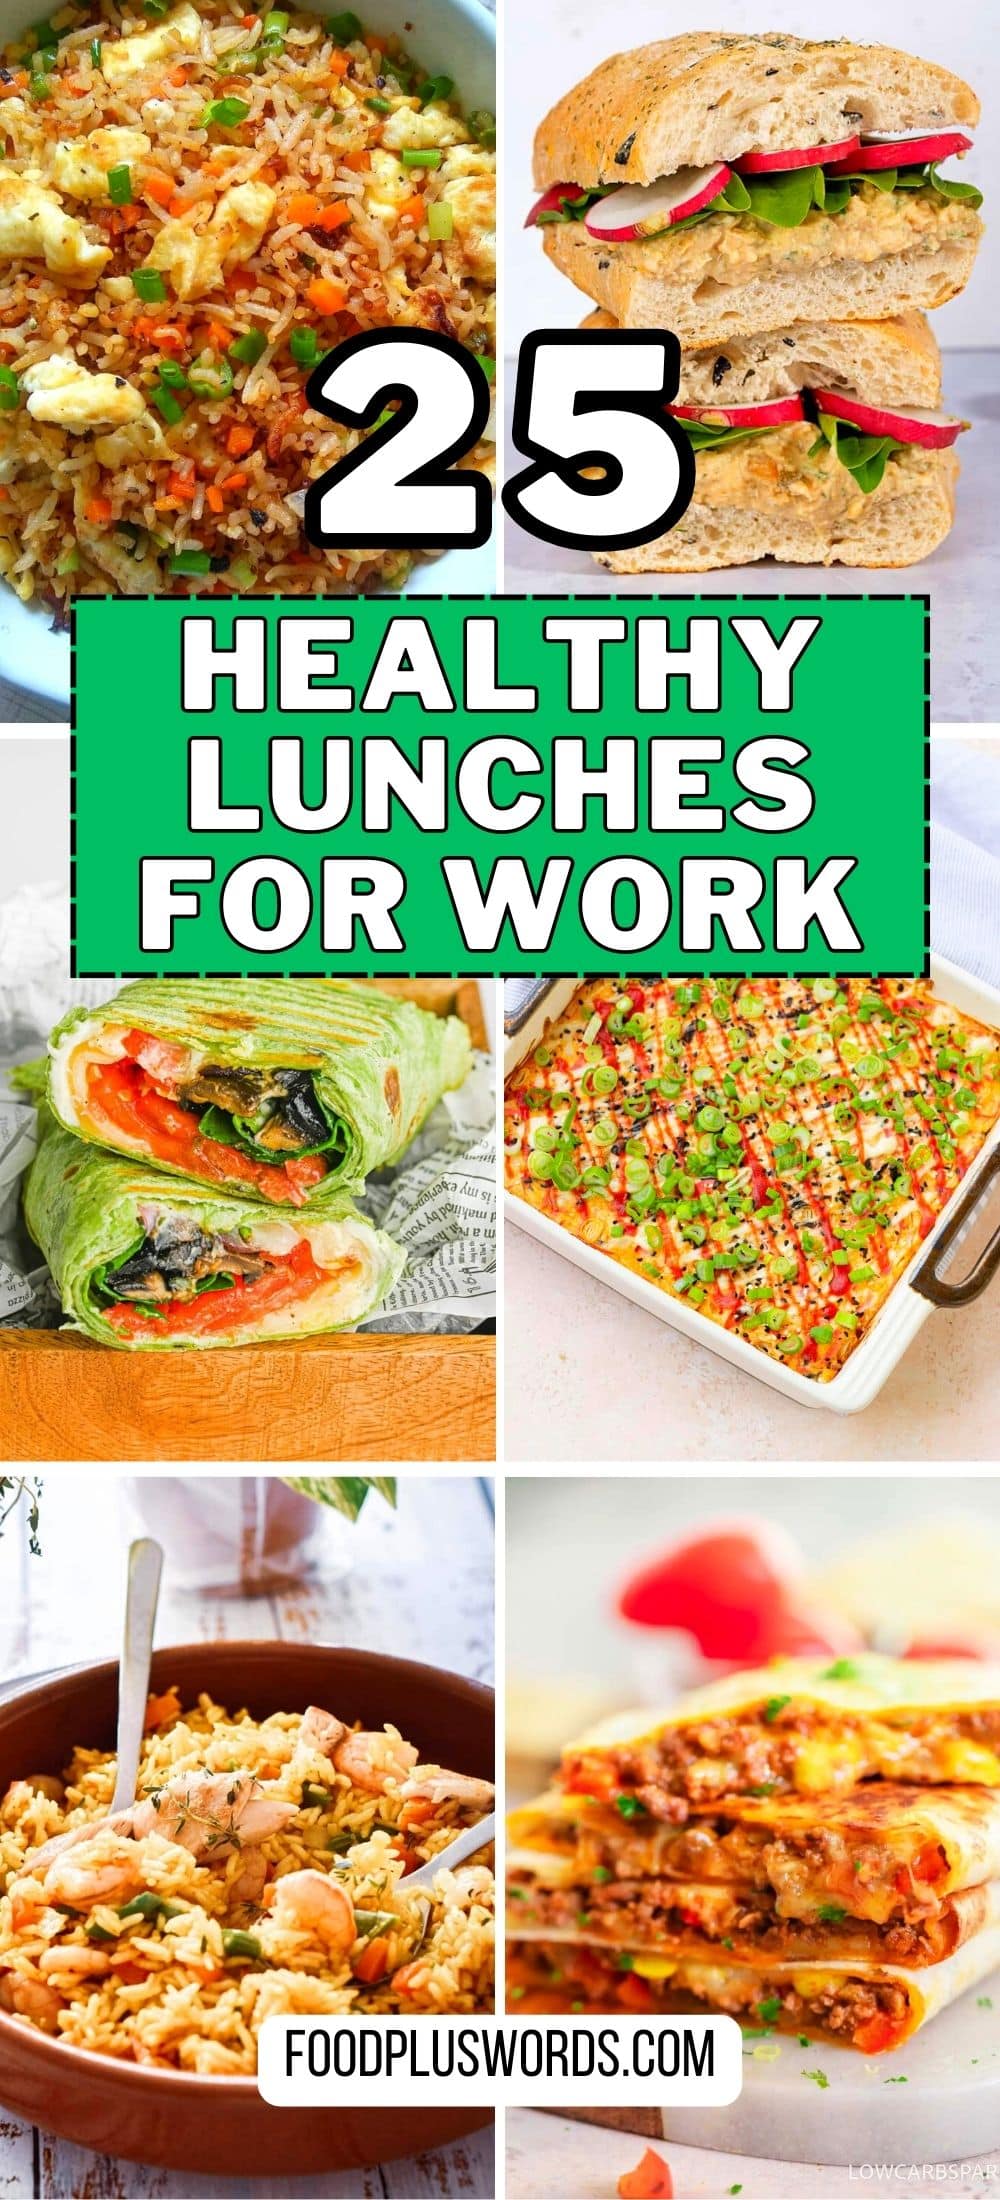 25 Lunch Ideas for Coworkers That Outshine Fast Food